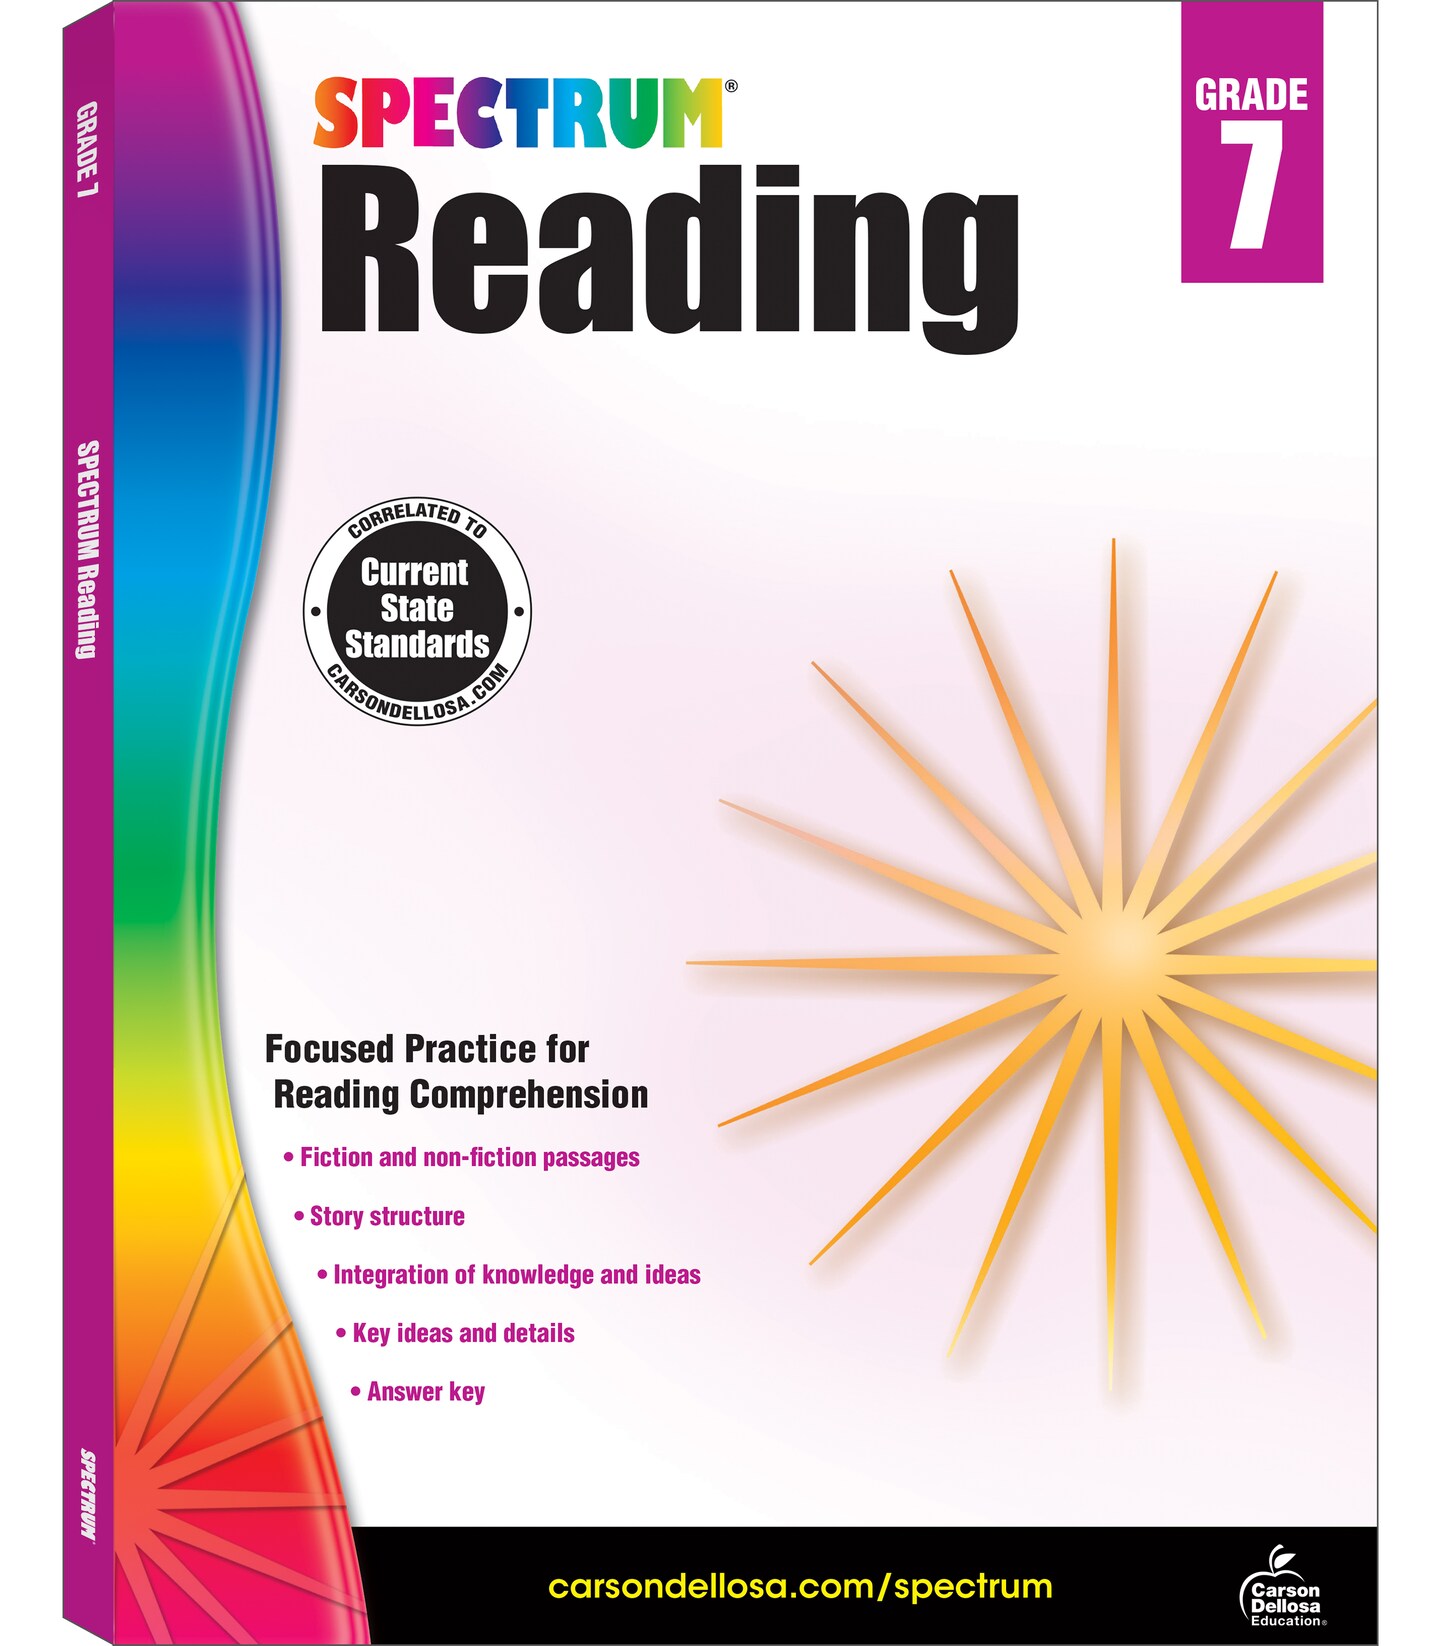 Spectrum Reading Comprehension Grade 7, Ages 12 to 13, 7th Grade Reading Comprehension Workbooks Covering Nonfiction and Fiction Passages, Analyzing and Summarizing Story Structure